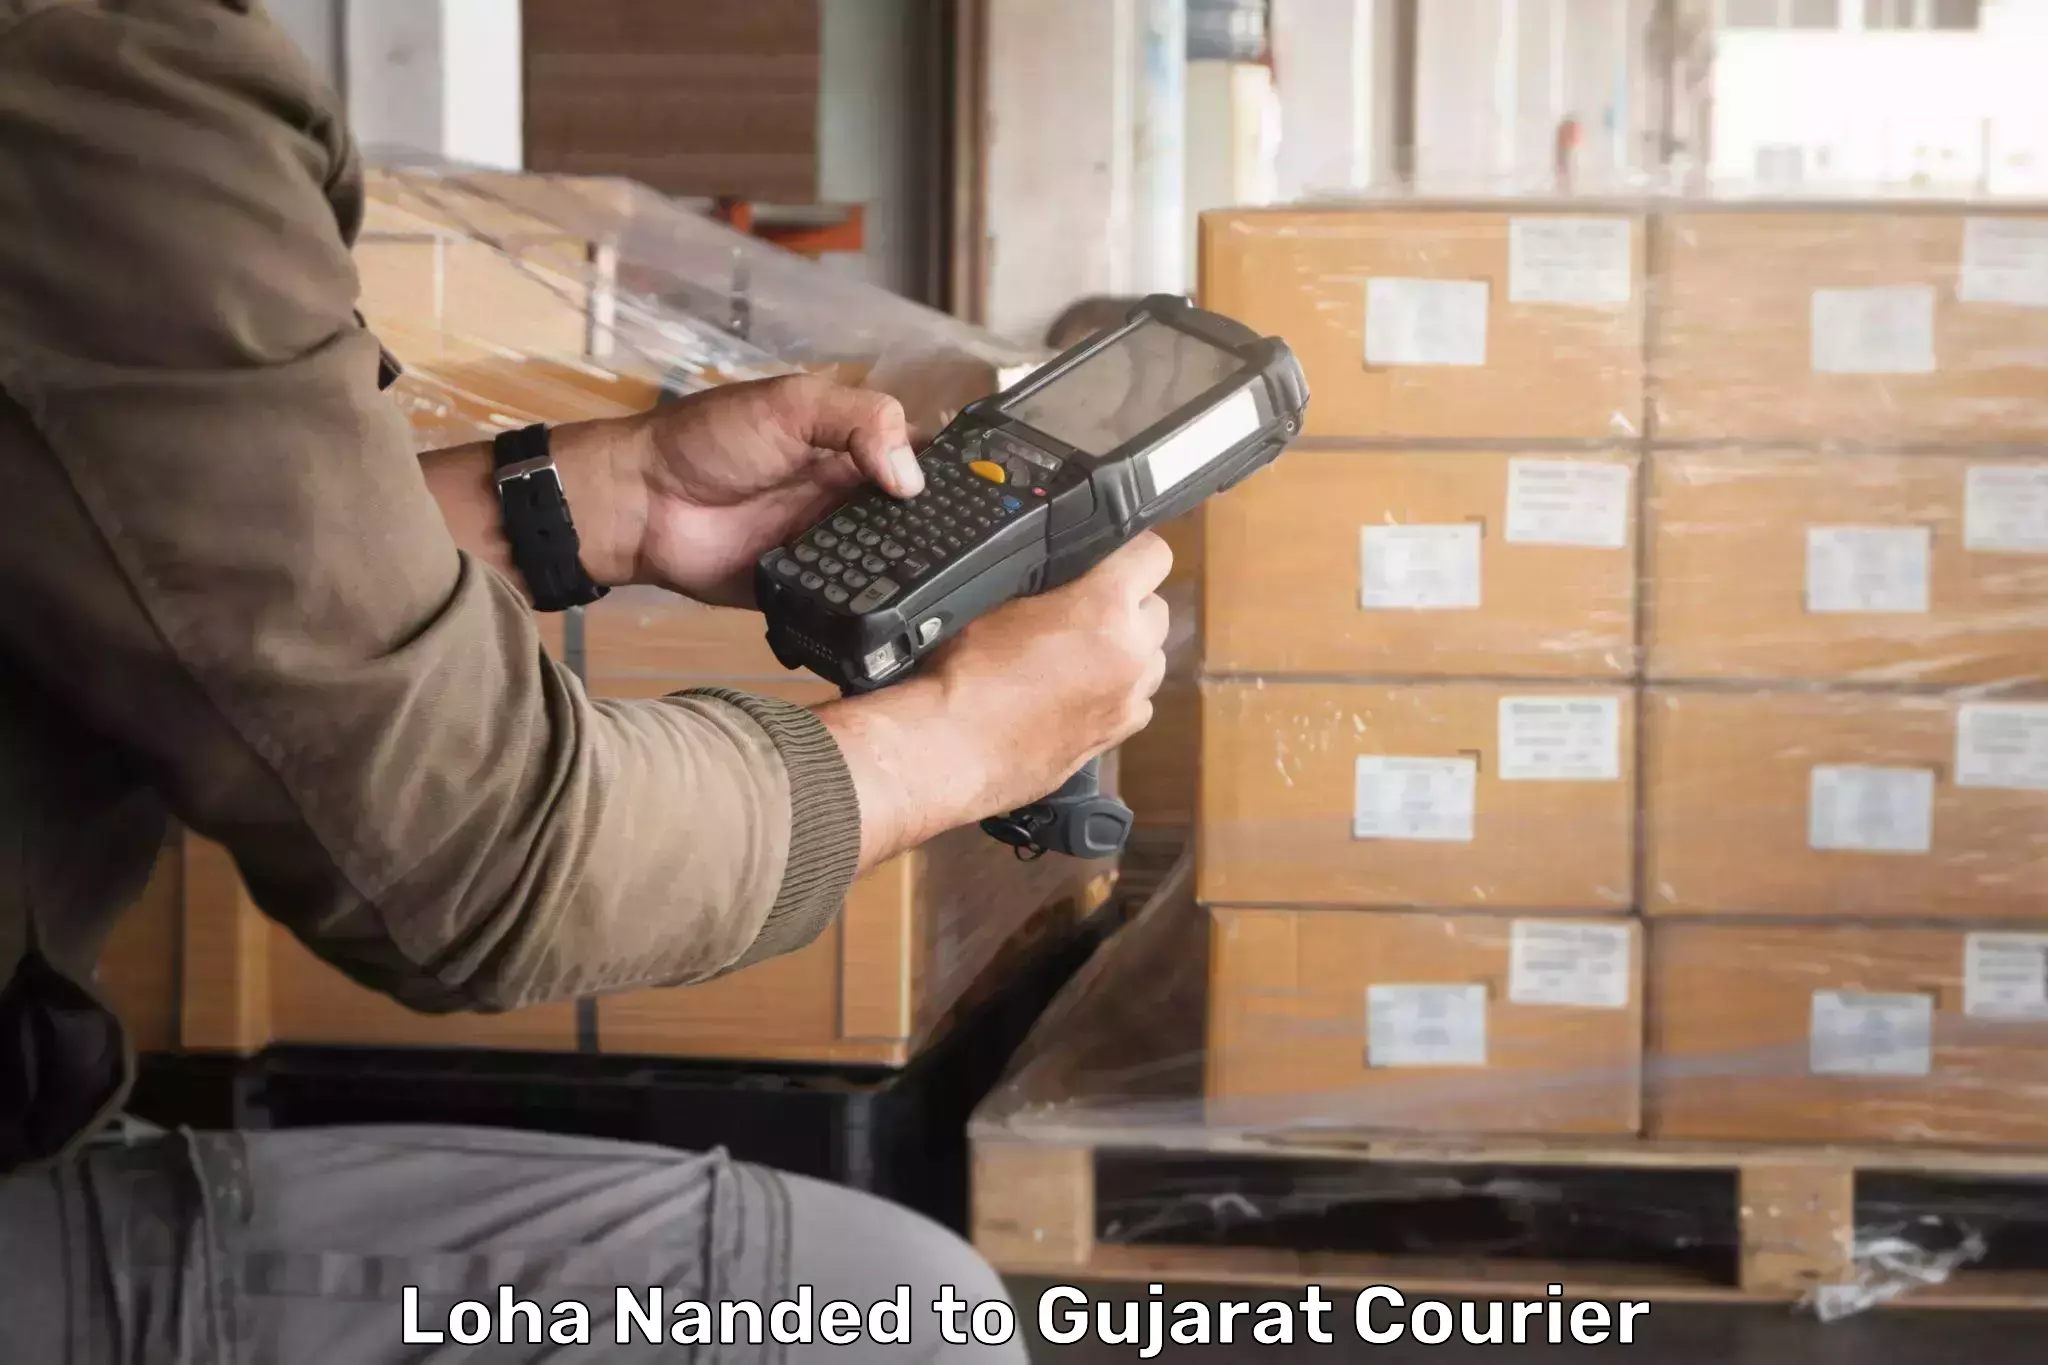 Reliable courier service Loha Nanded to Ahmedabad